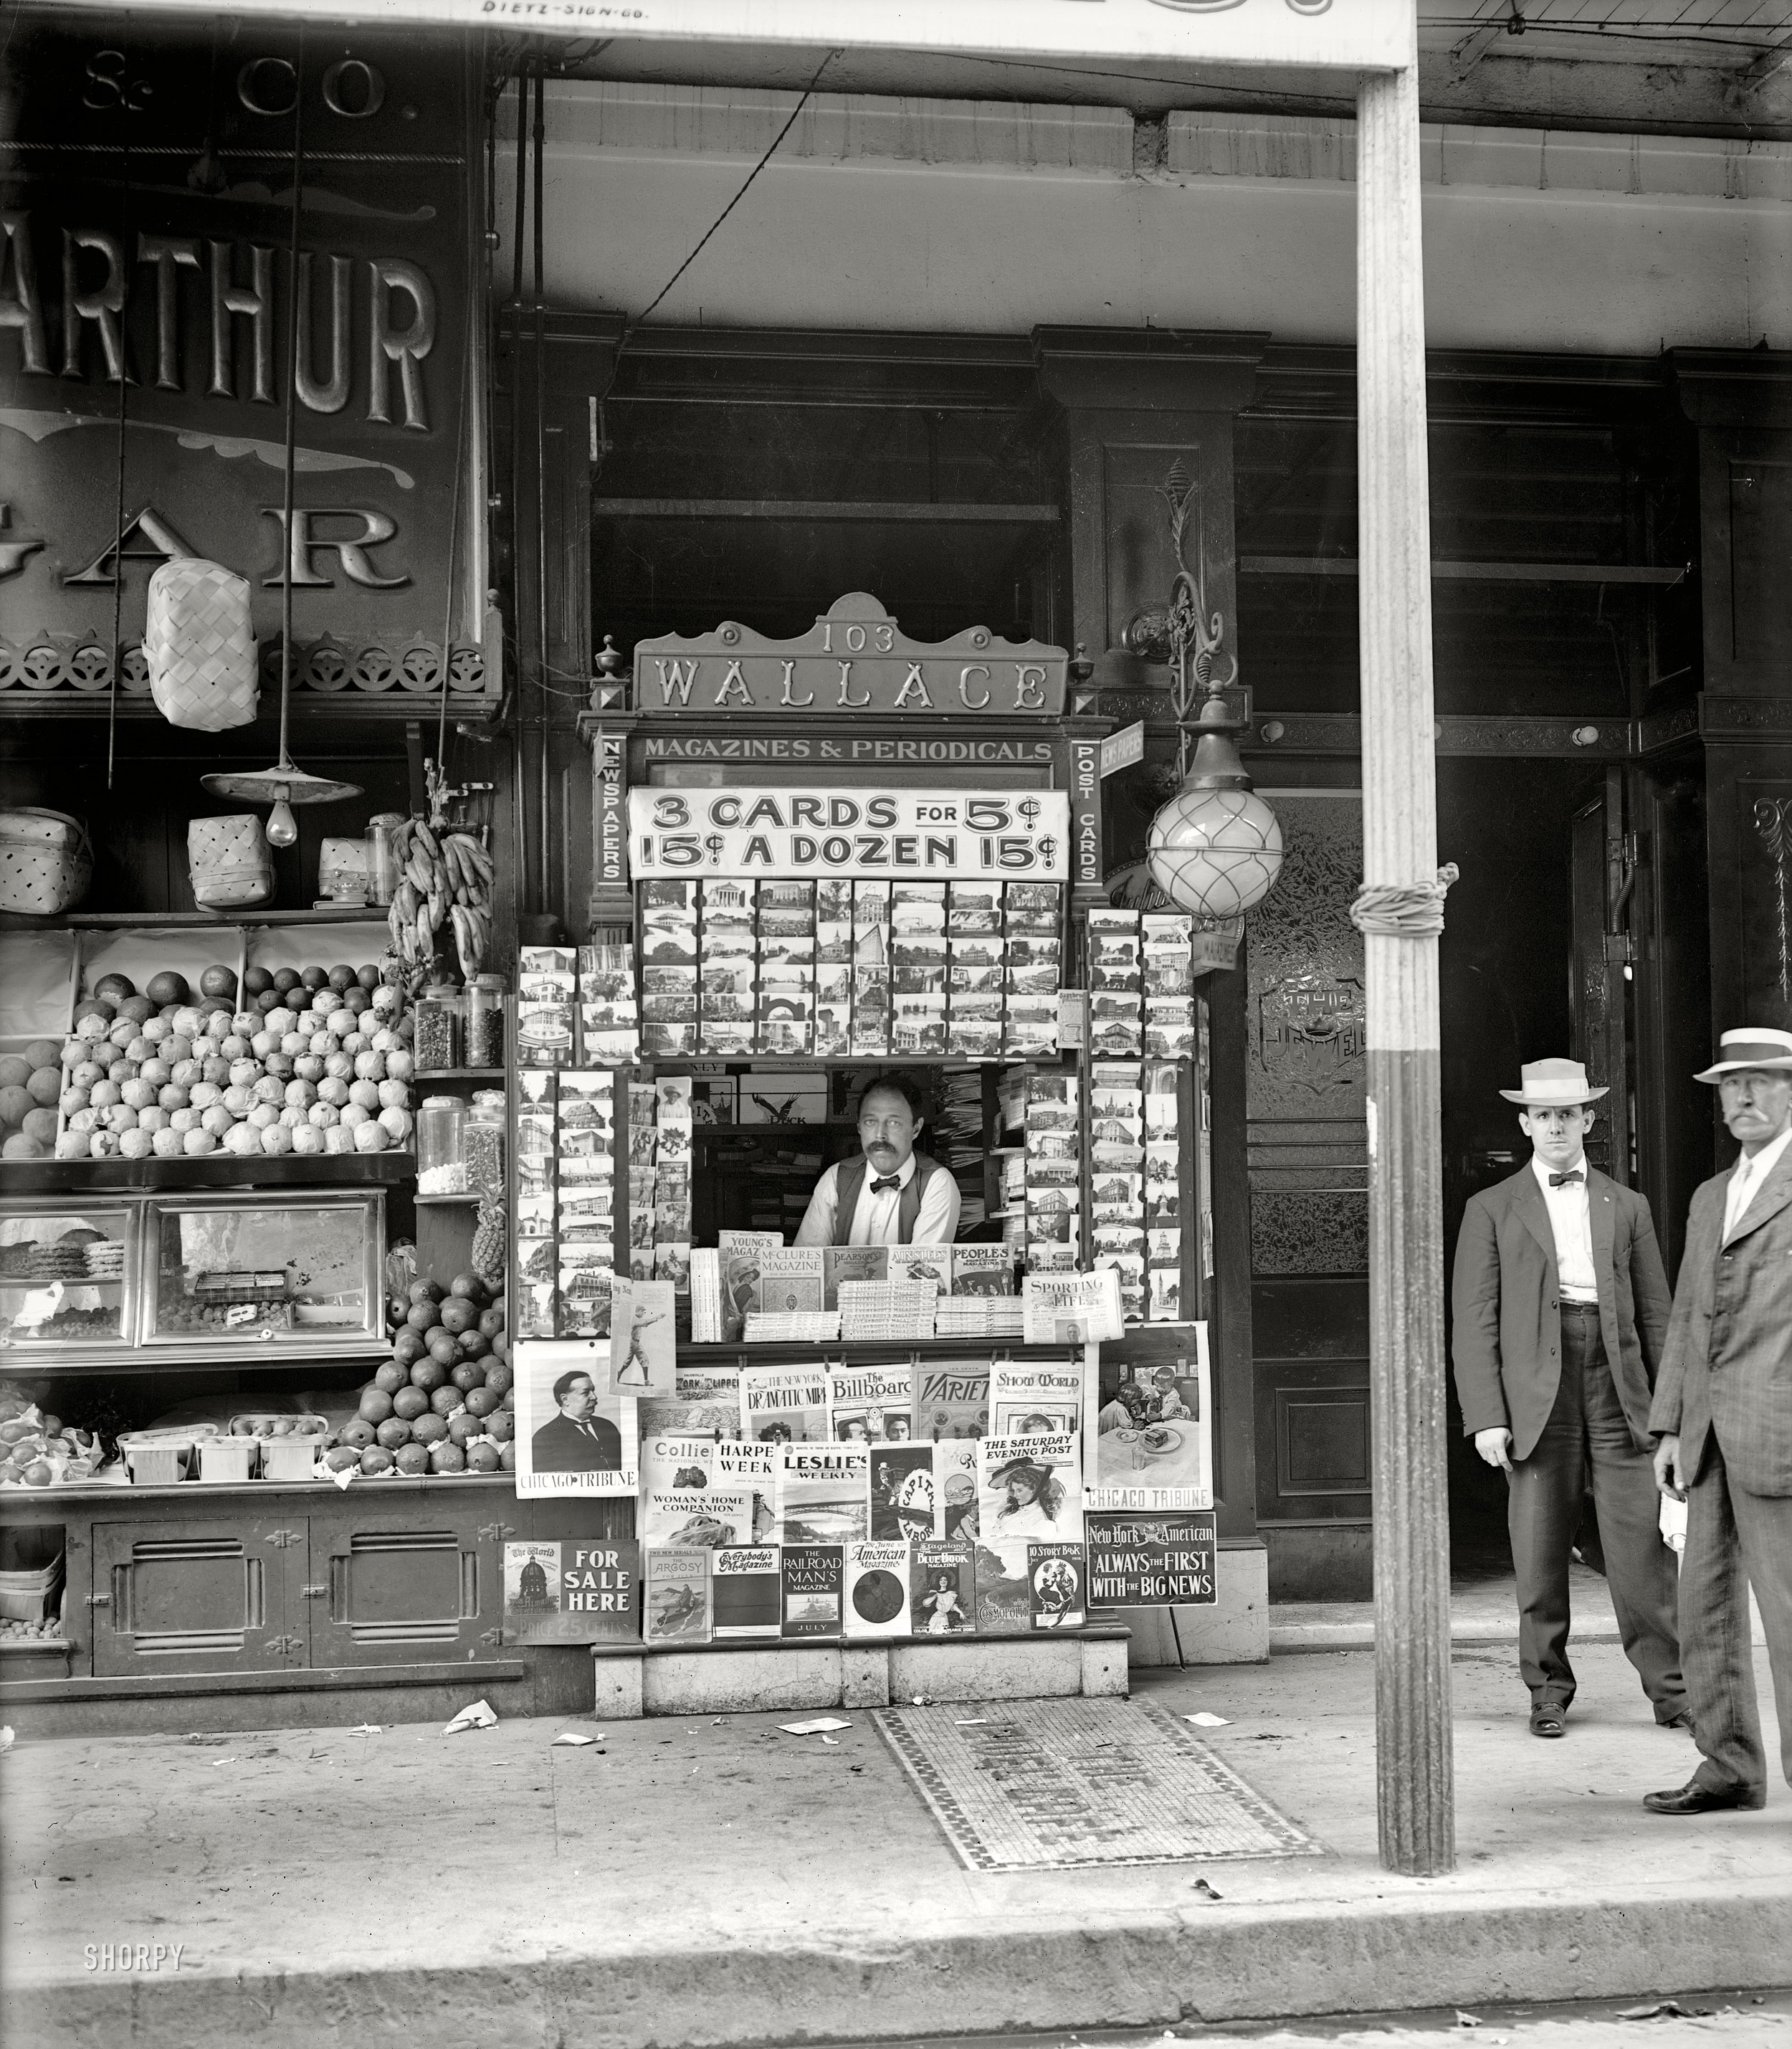 1908. "Smallest news & post card stand in New Orleans, 103 Royal Street." 8x10 inch dry plate glass negative, Detroit Publishing Company. View full size.